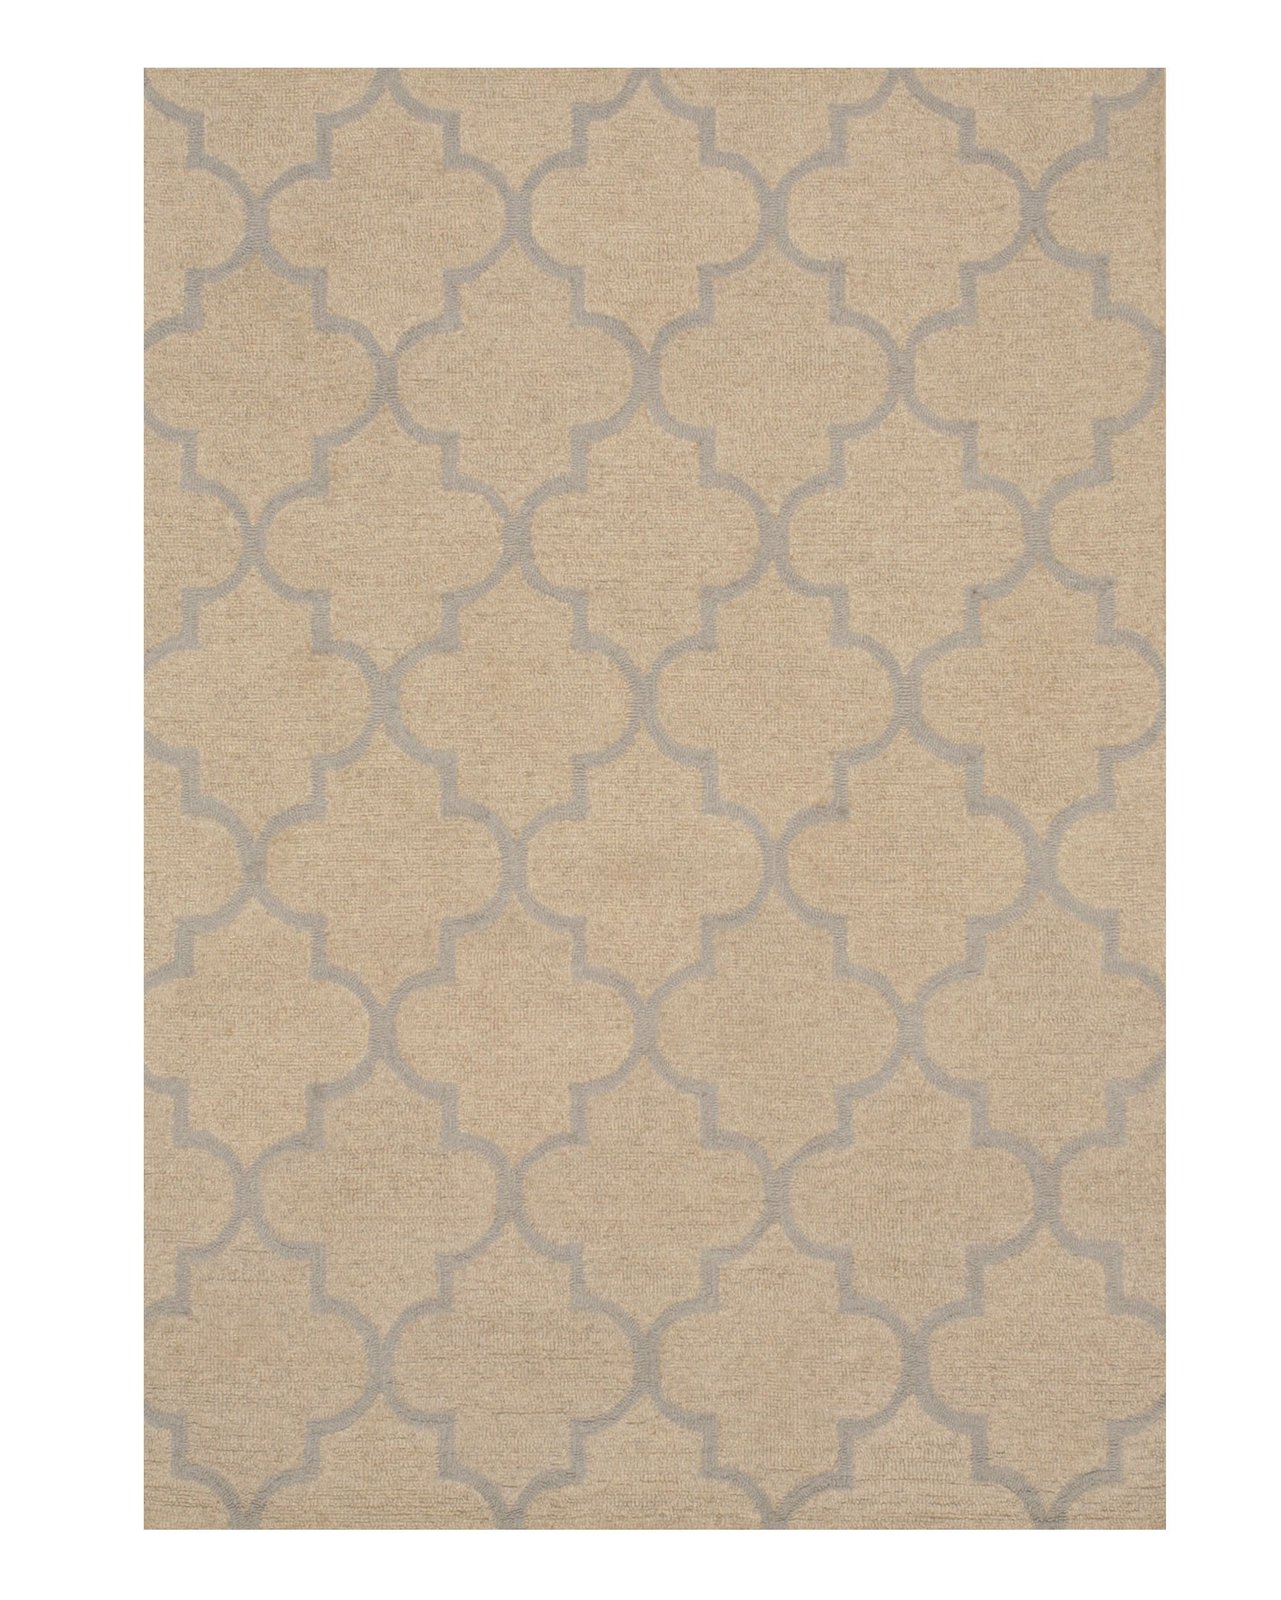 EORC ME2BL5X7 Hand-Tufted Wool Moroccan Rug, 5' x 7', Blue - $122.45 - $142.05